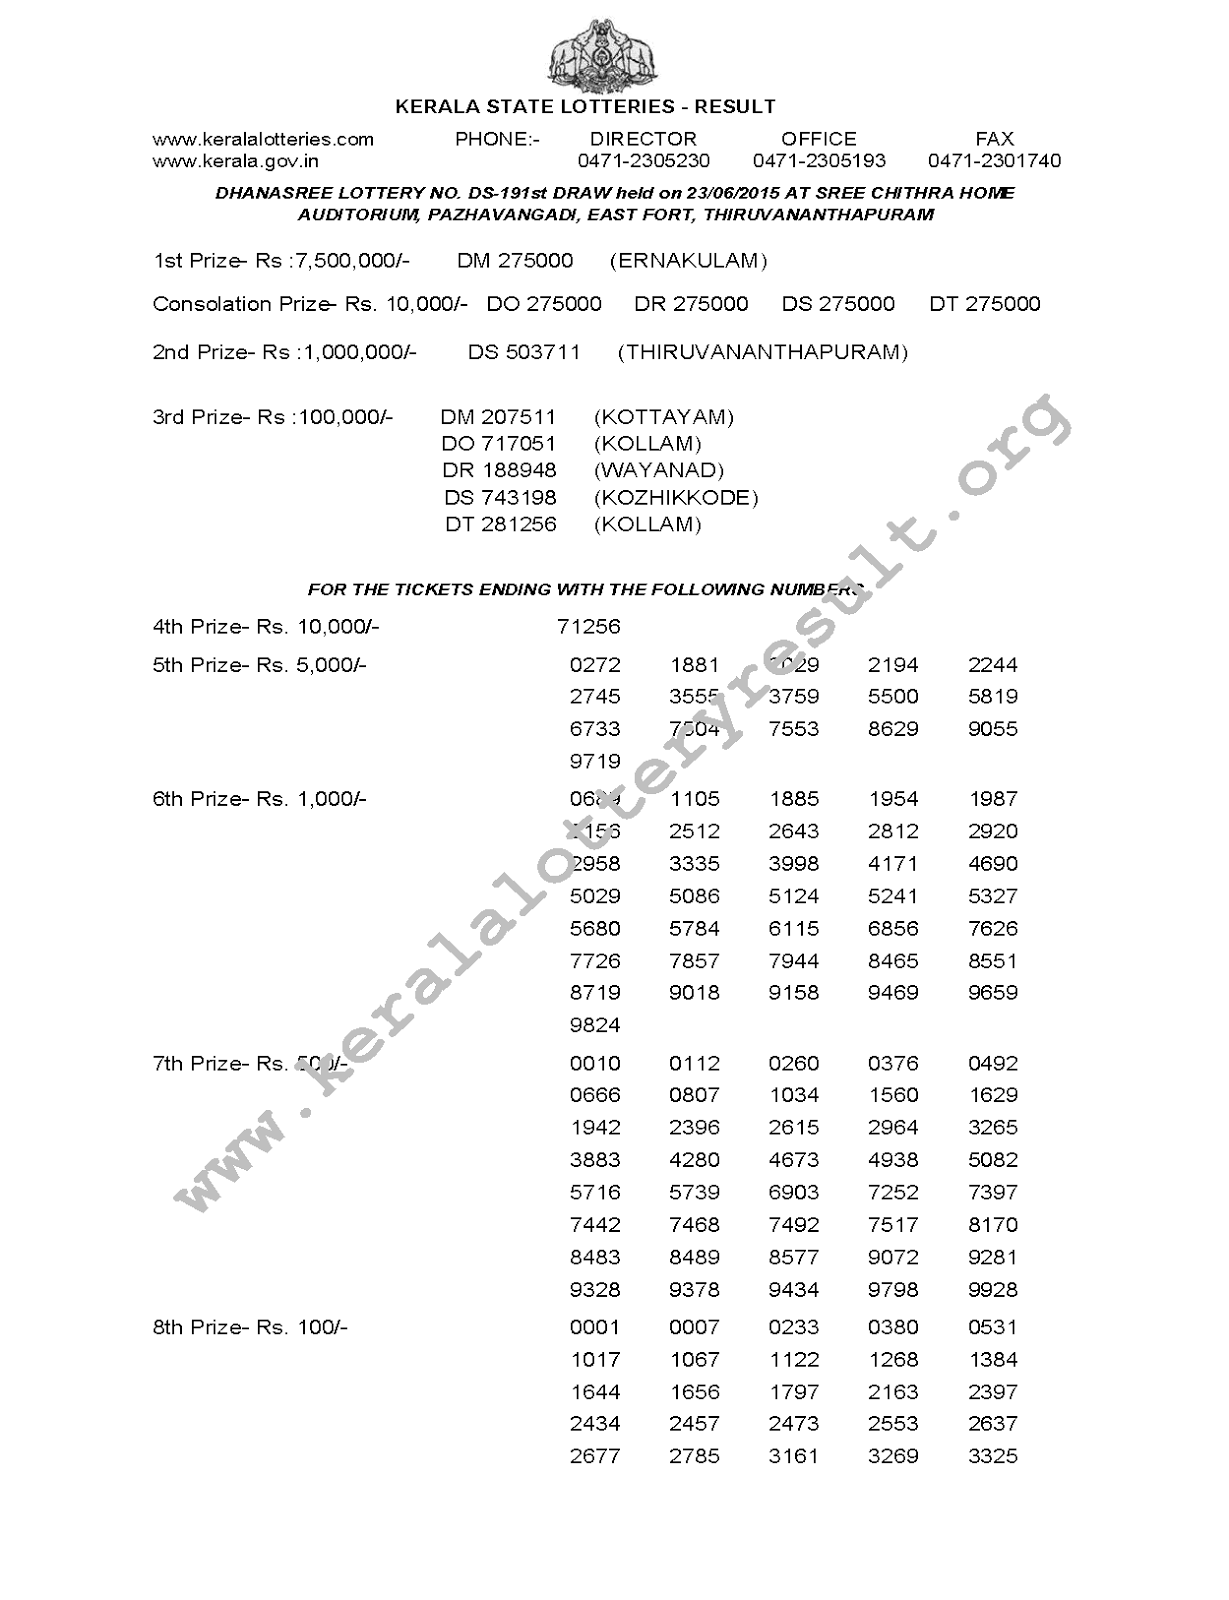 DHANASREE Lottery DS 191 Result 23-6-2015